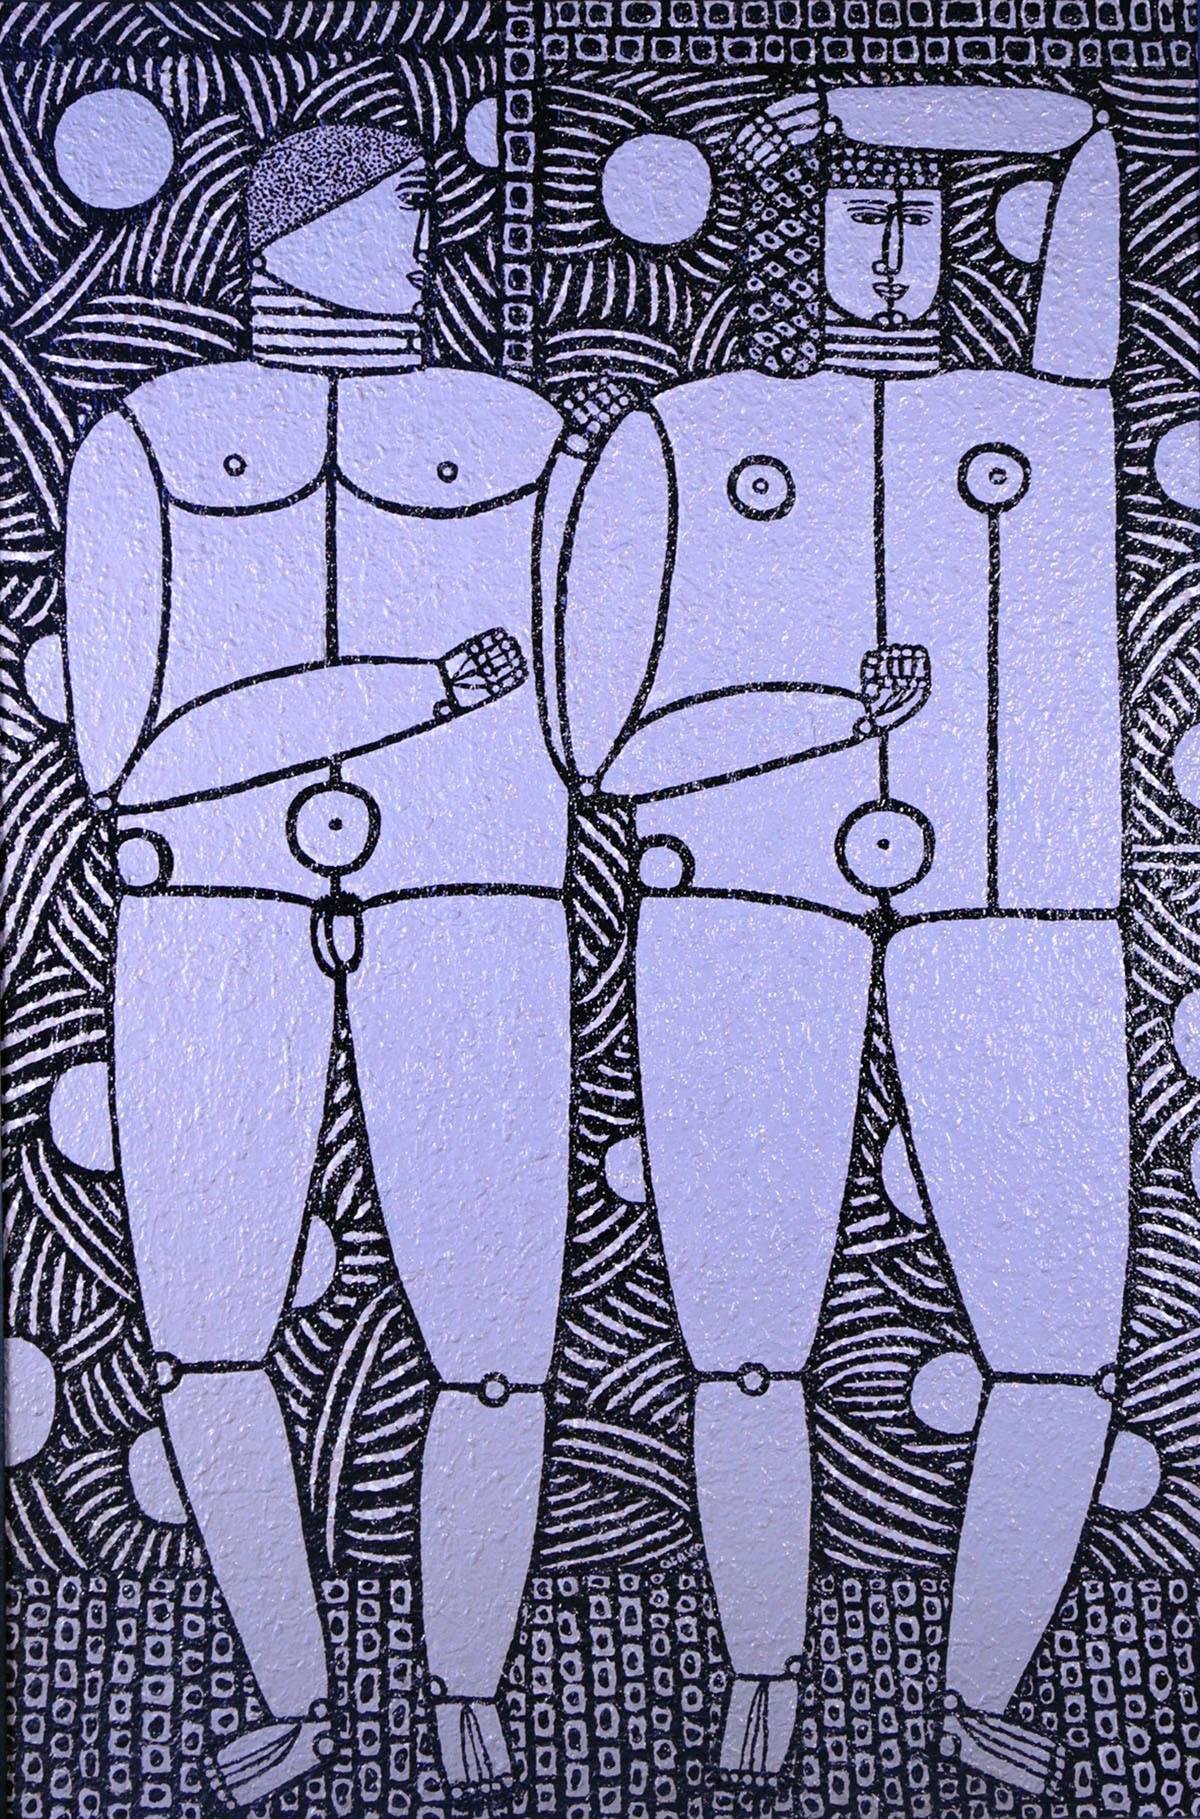 Two Figures, 1973 - Painting by Joseph Glasco